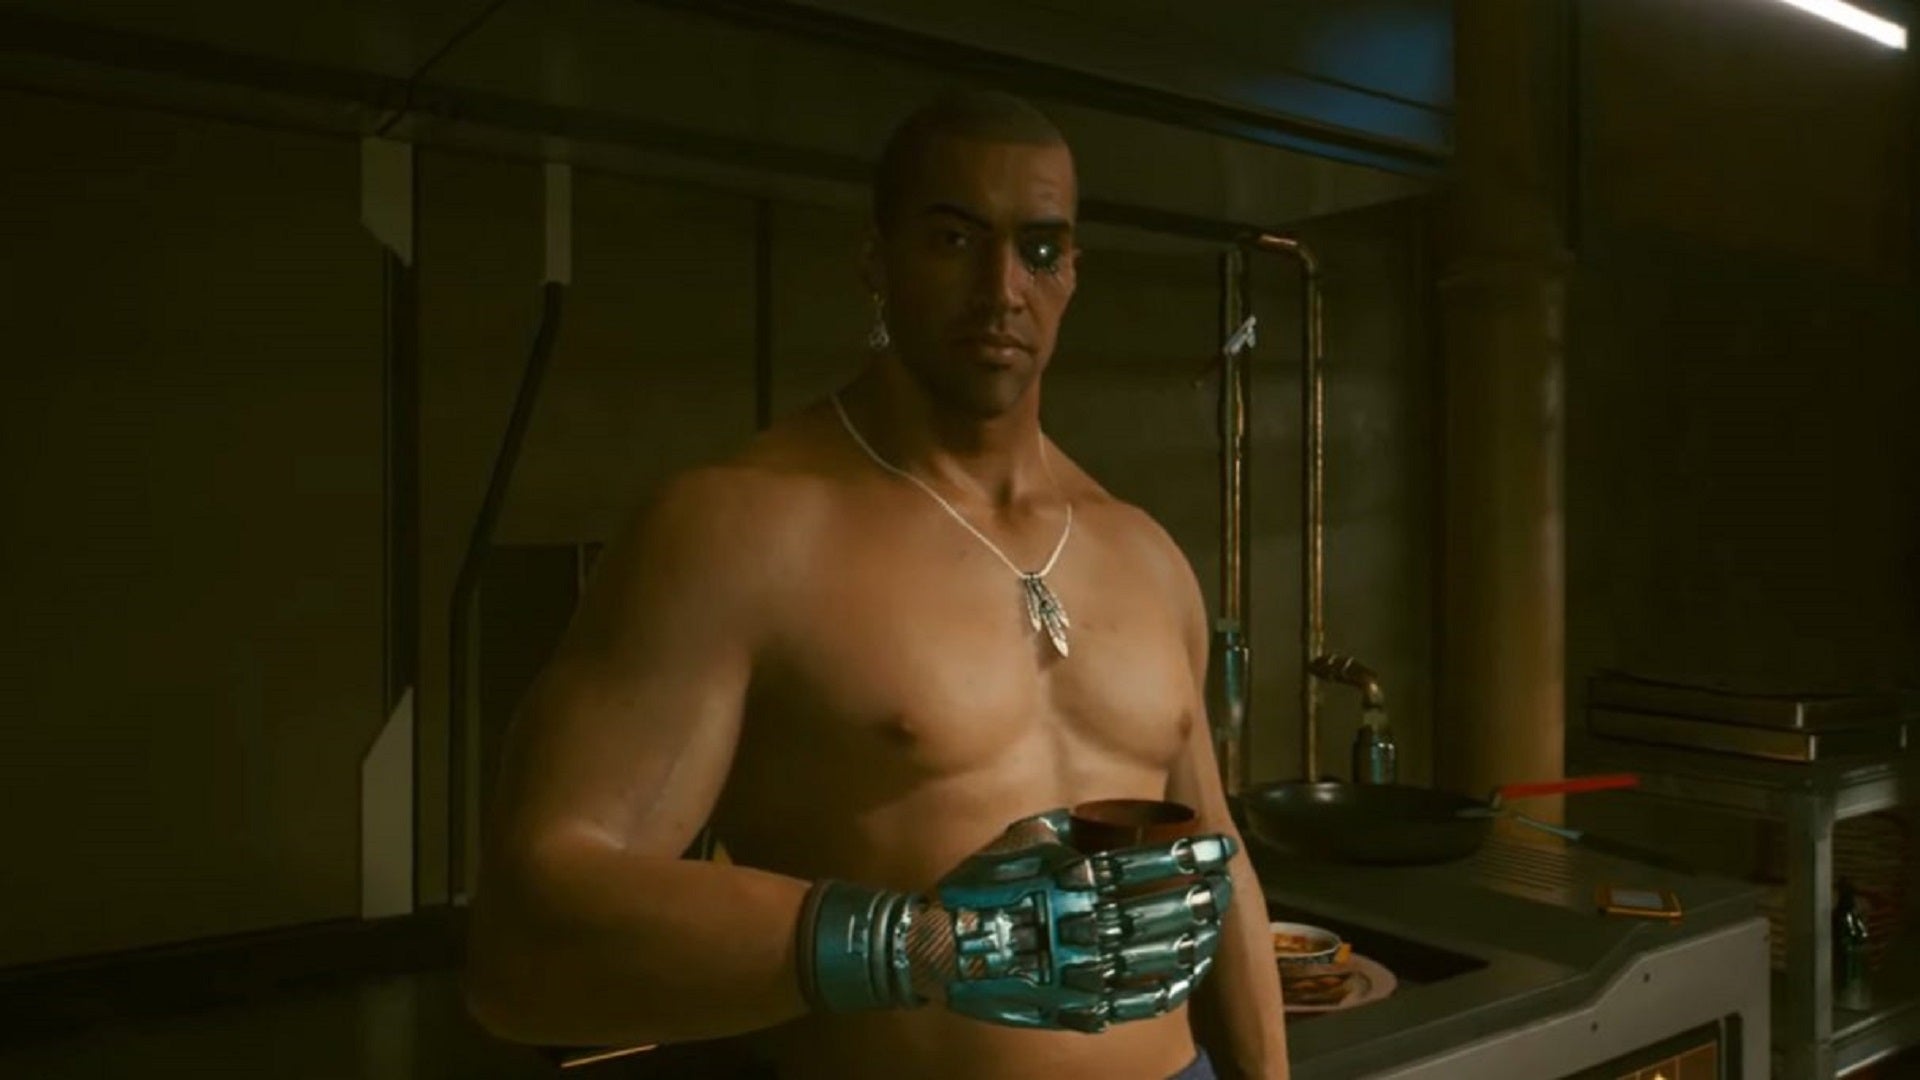 River from Cyberpunk 2077, leaning casually against a kitchen counter all shirtless and cyborg-y.